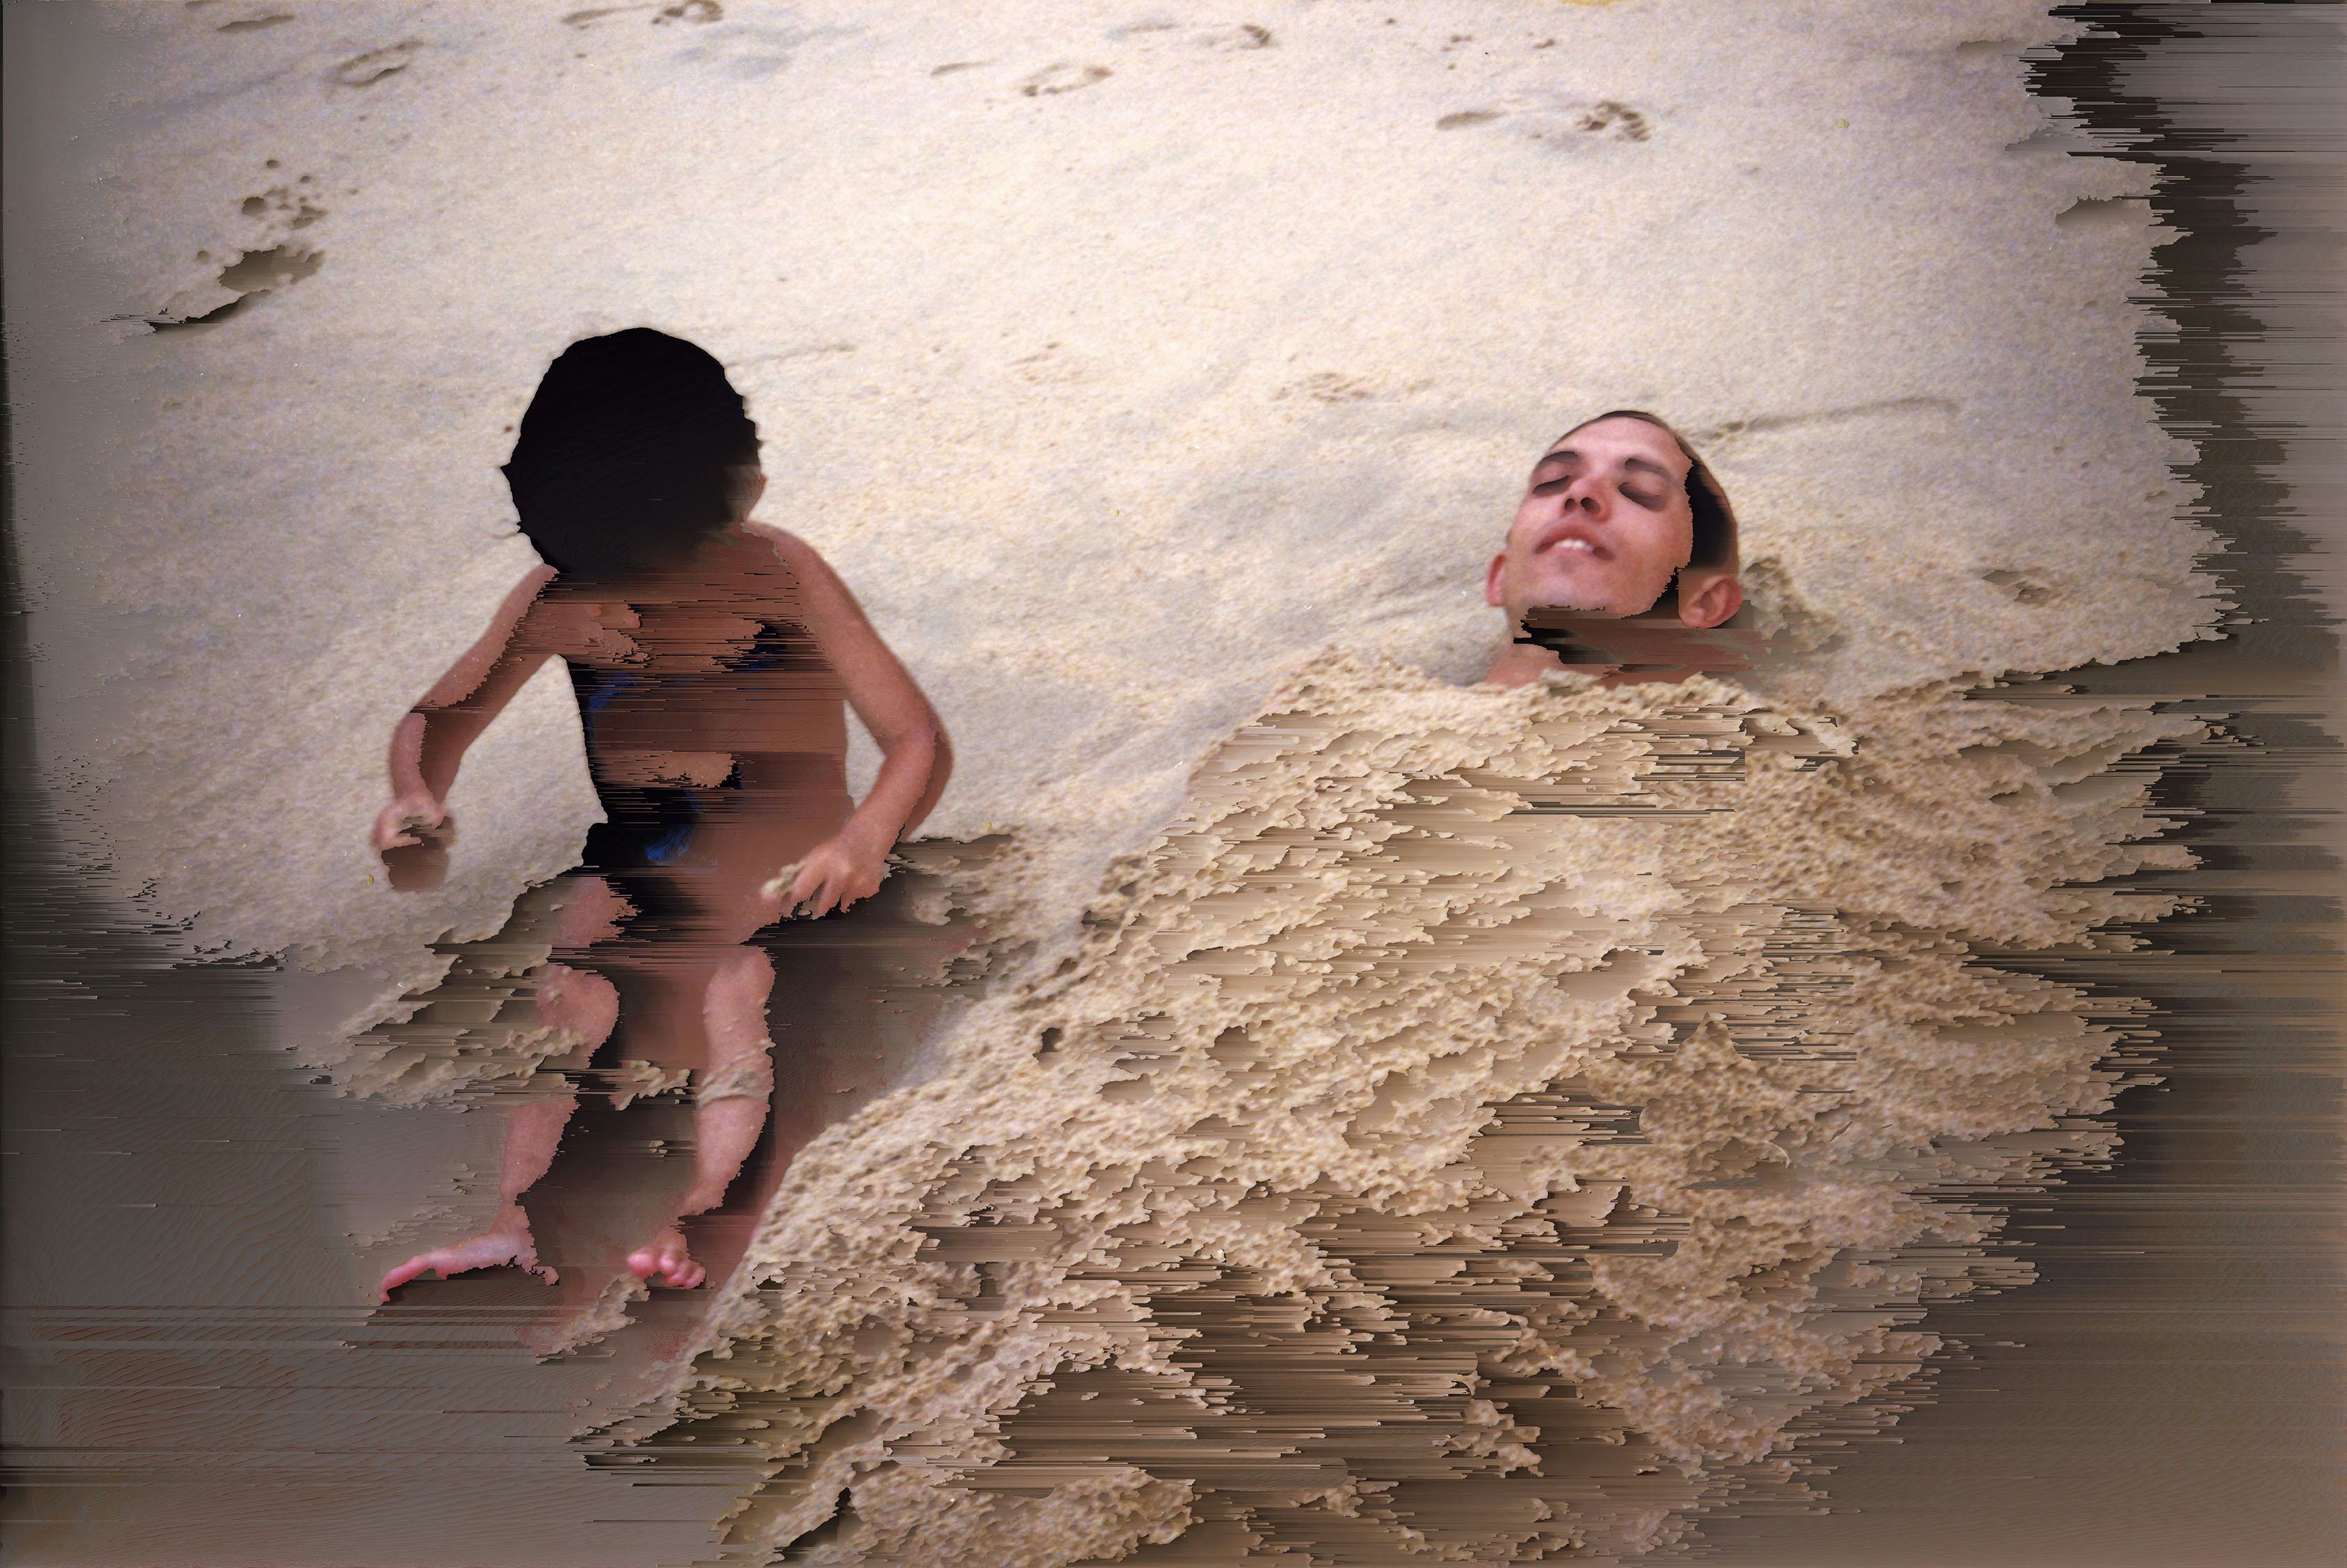 A man buried in sand and a child